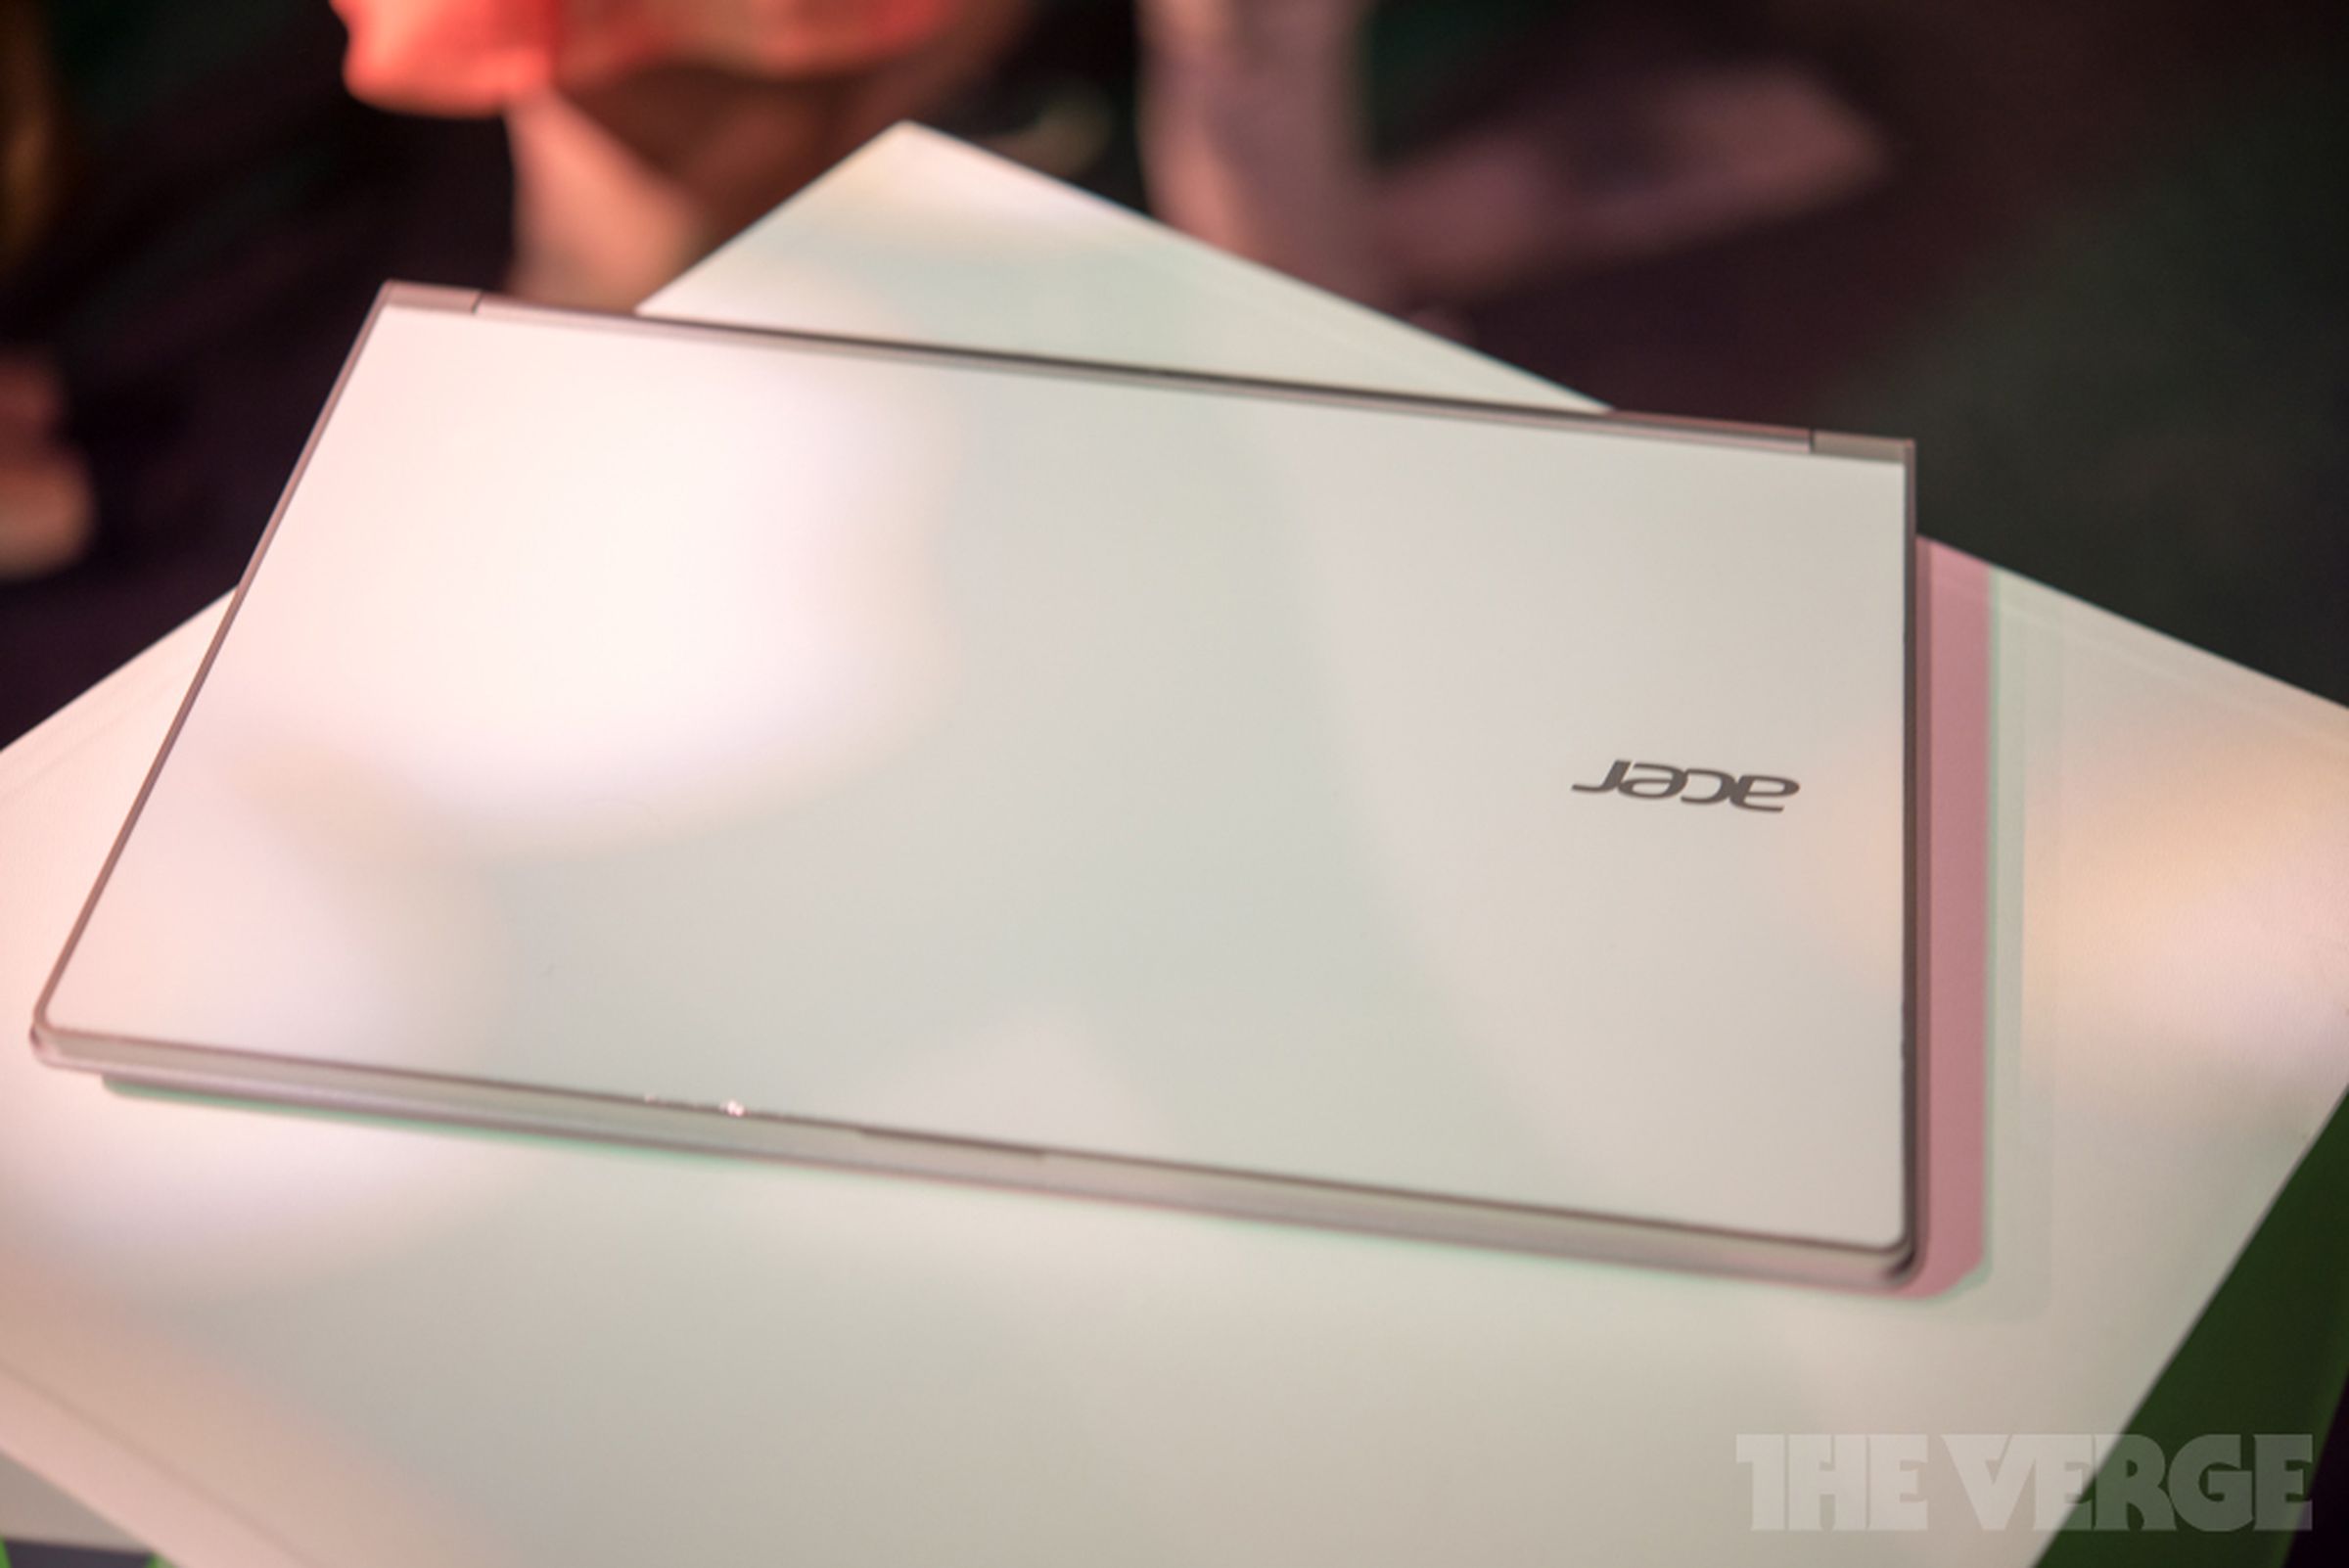 Acer Aspire S3 hands-on pictures